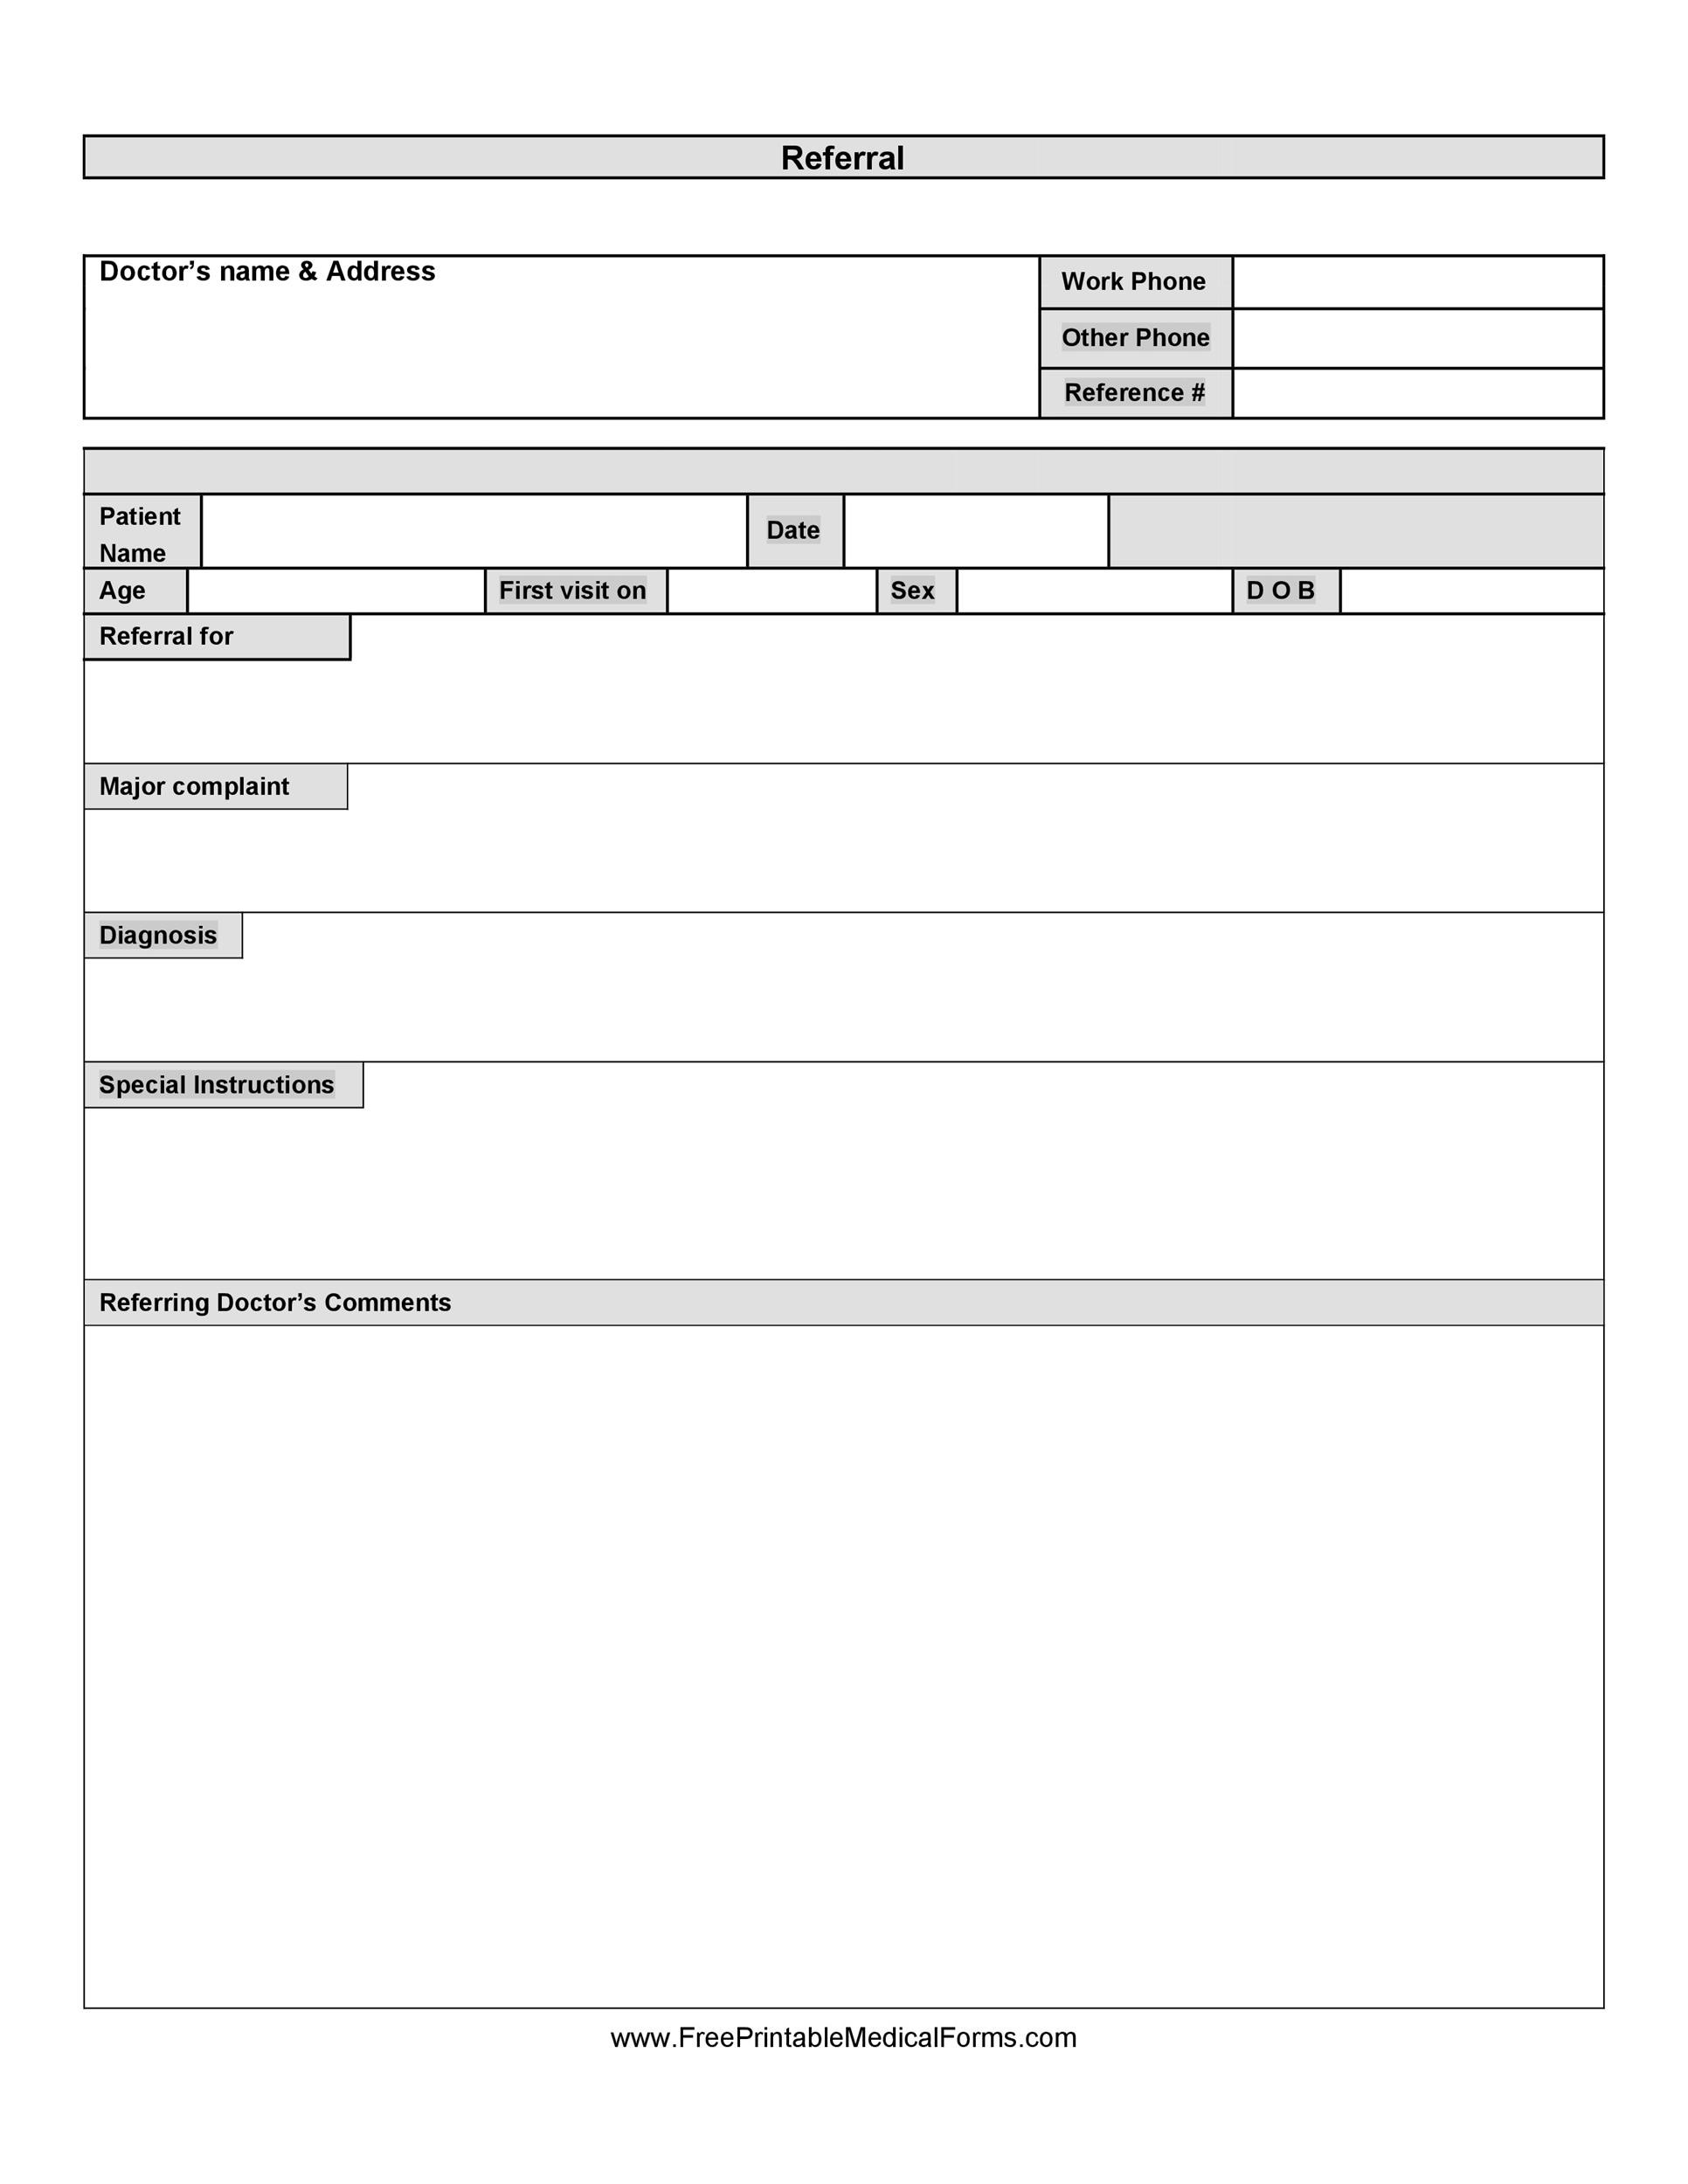 Free referral form template 20